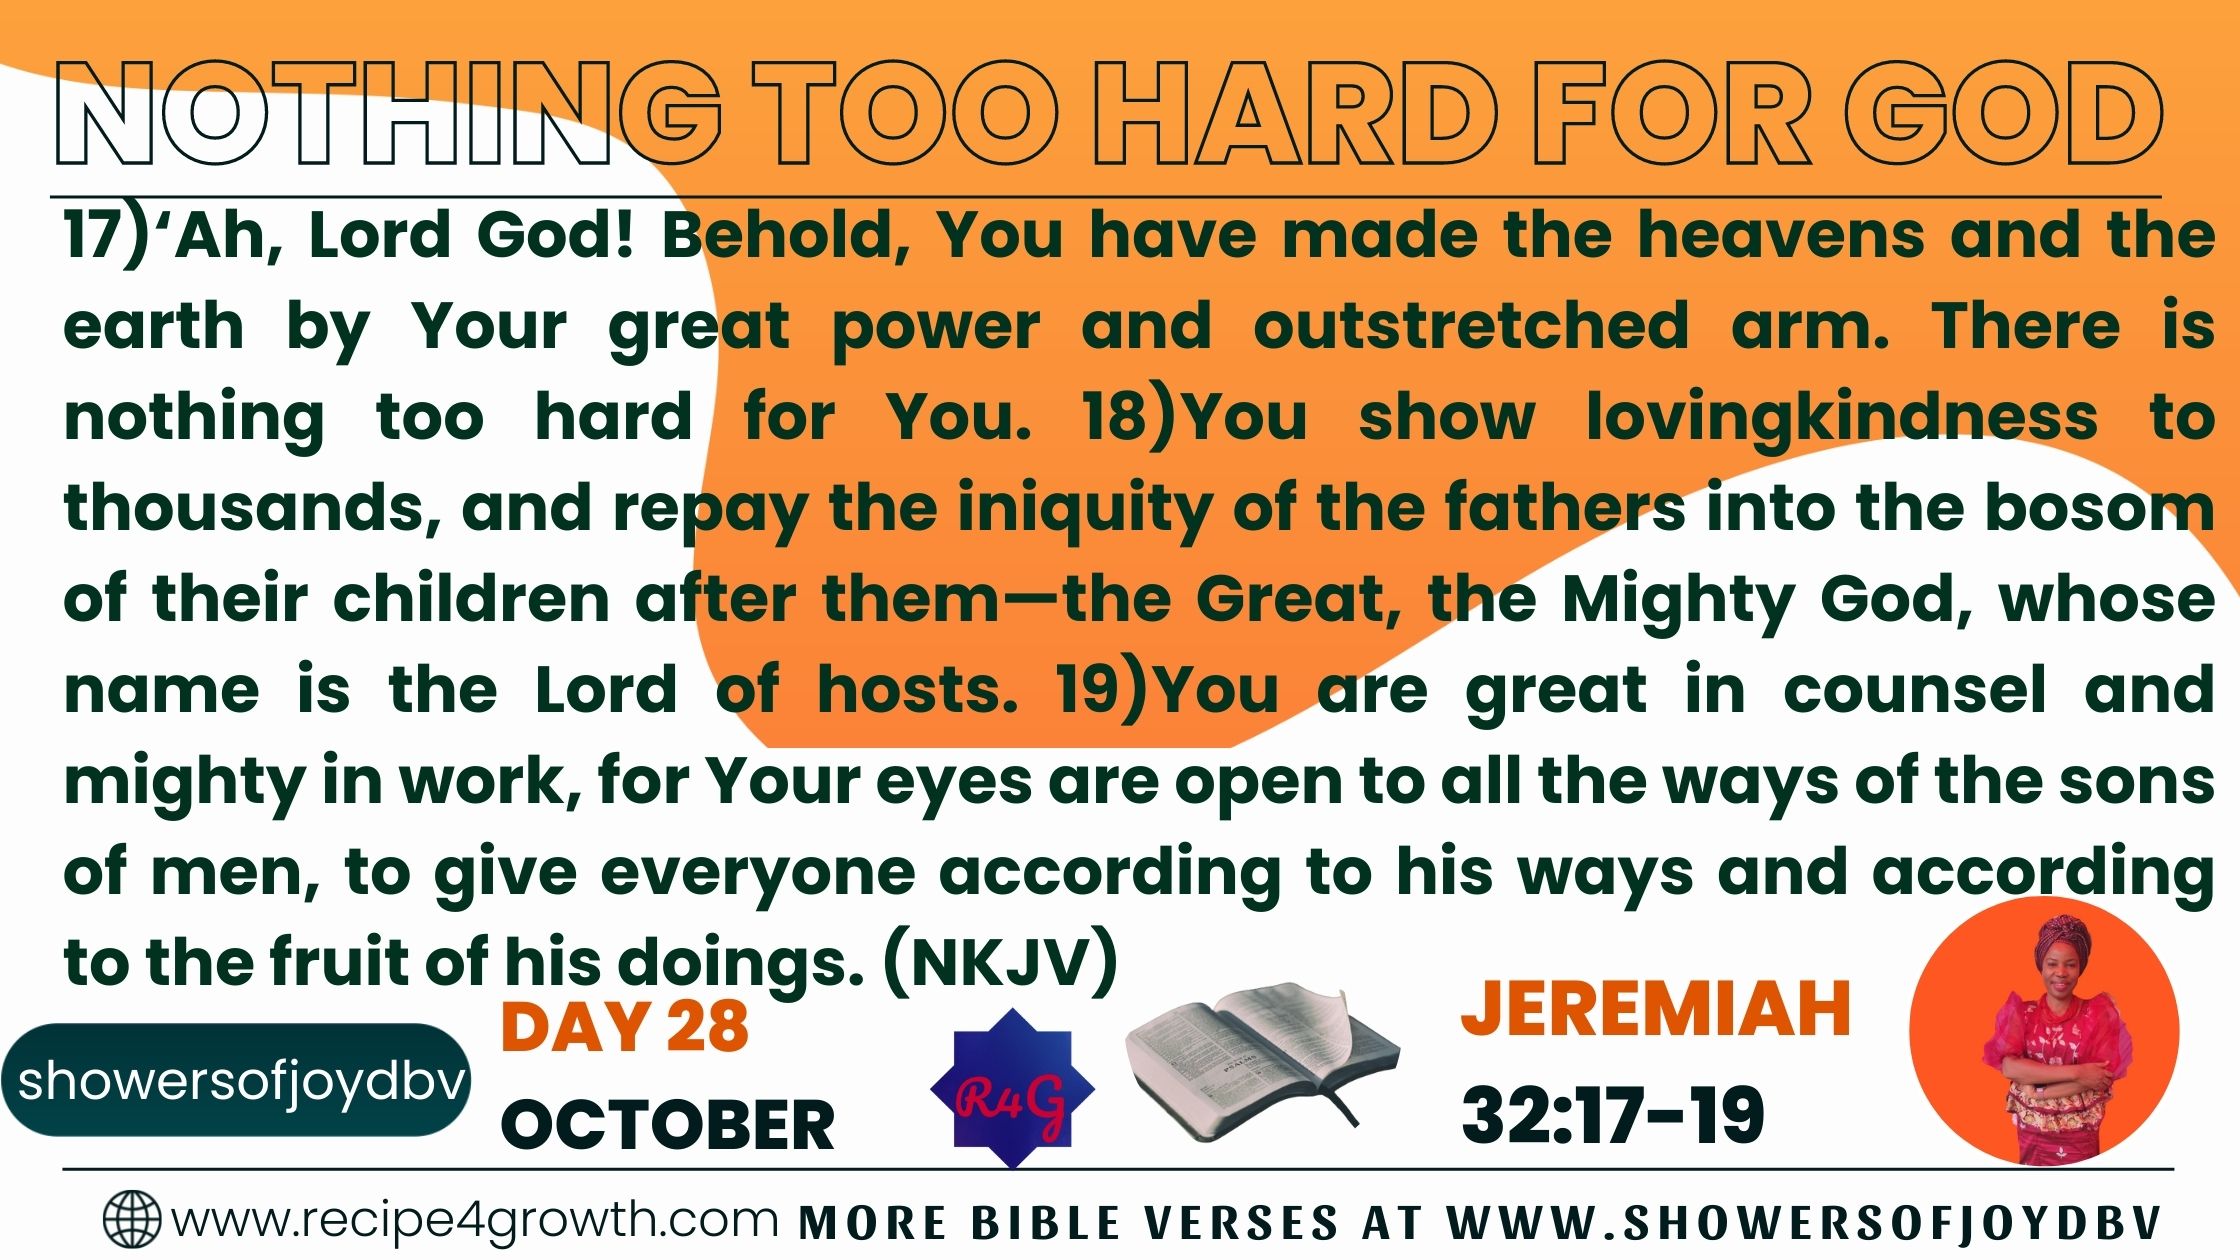 THERE IS NOTHING TOO HARD FOR GOD JEREMIAH 32:17-19